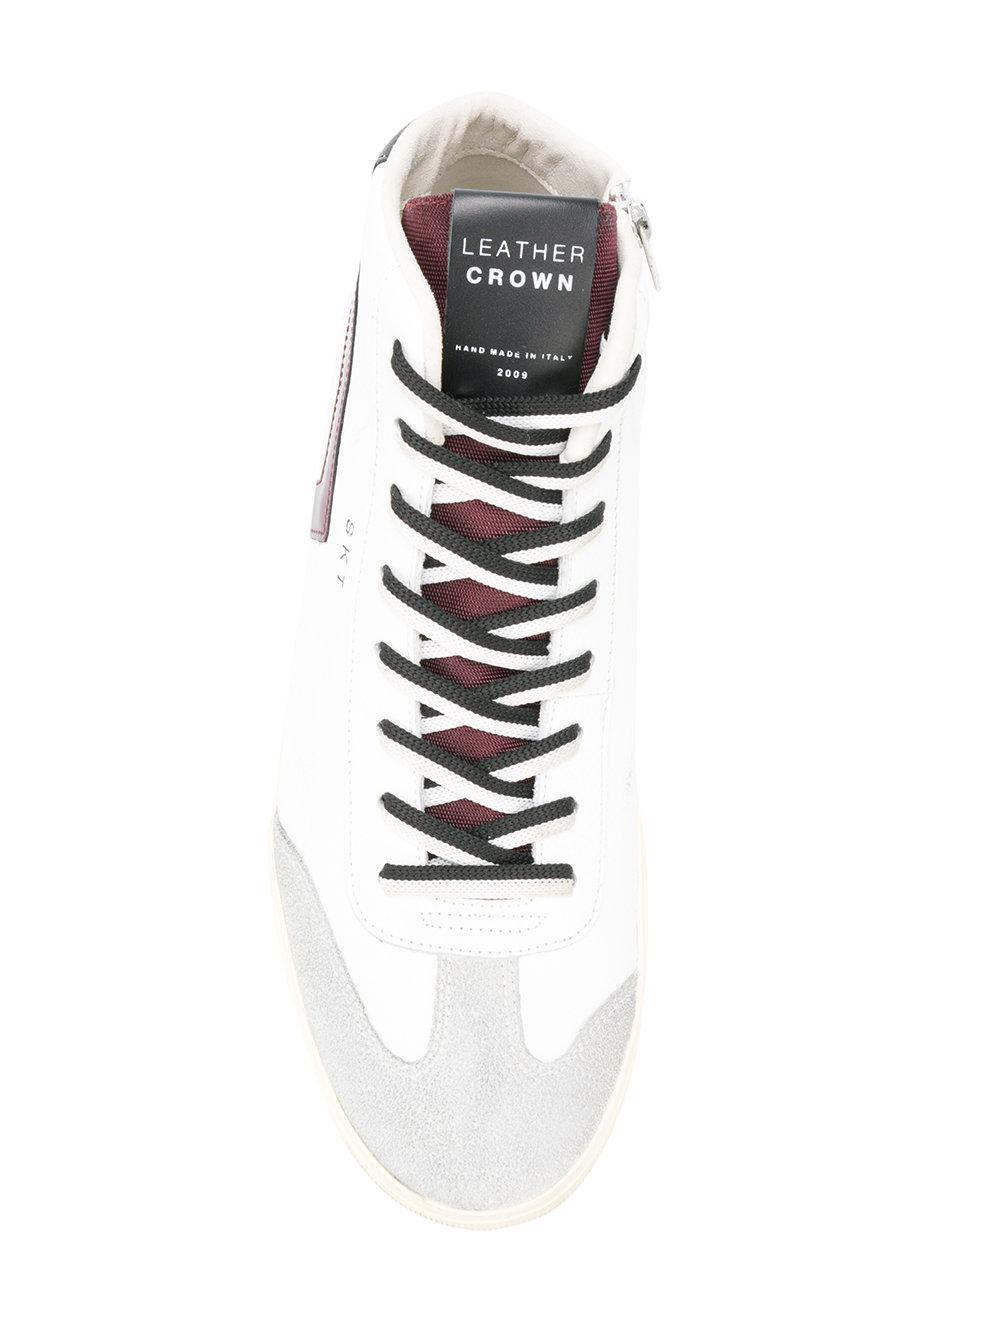 Leather Crown Leather Skt Sneakers in White for Men - Lyst